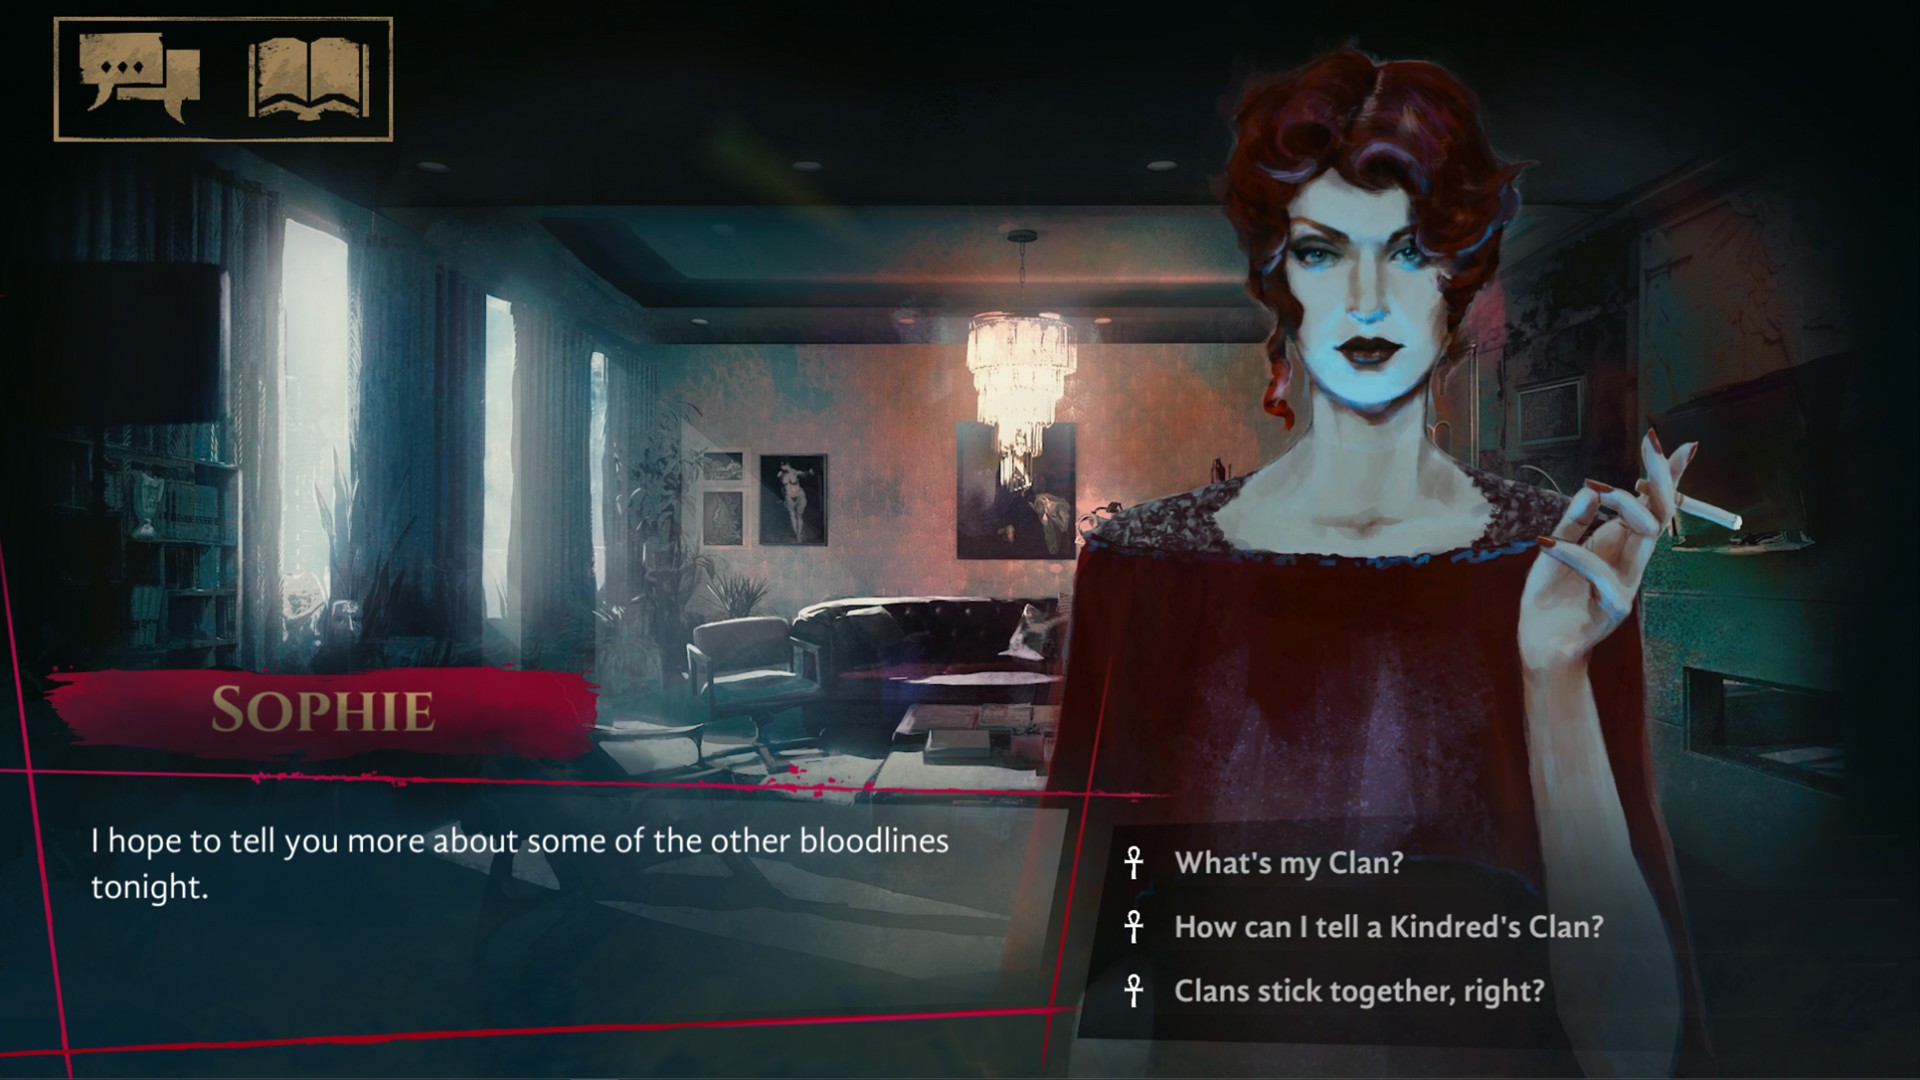 Action, Draw Distance, Fiction, Horror, indie, interactive, Nintendo Switch Review, Role Playing Game, RPG, Switch Review, Vampire, Vampire: The Masquerade – Coteries of New York, Vampire: The Masquerade – Coteries of New York Review, Visual Novel